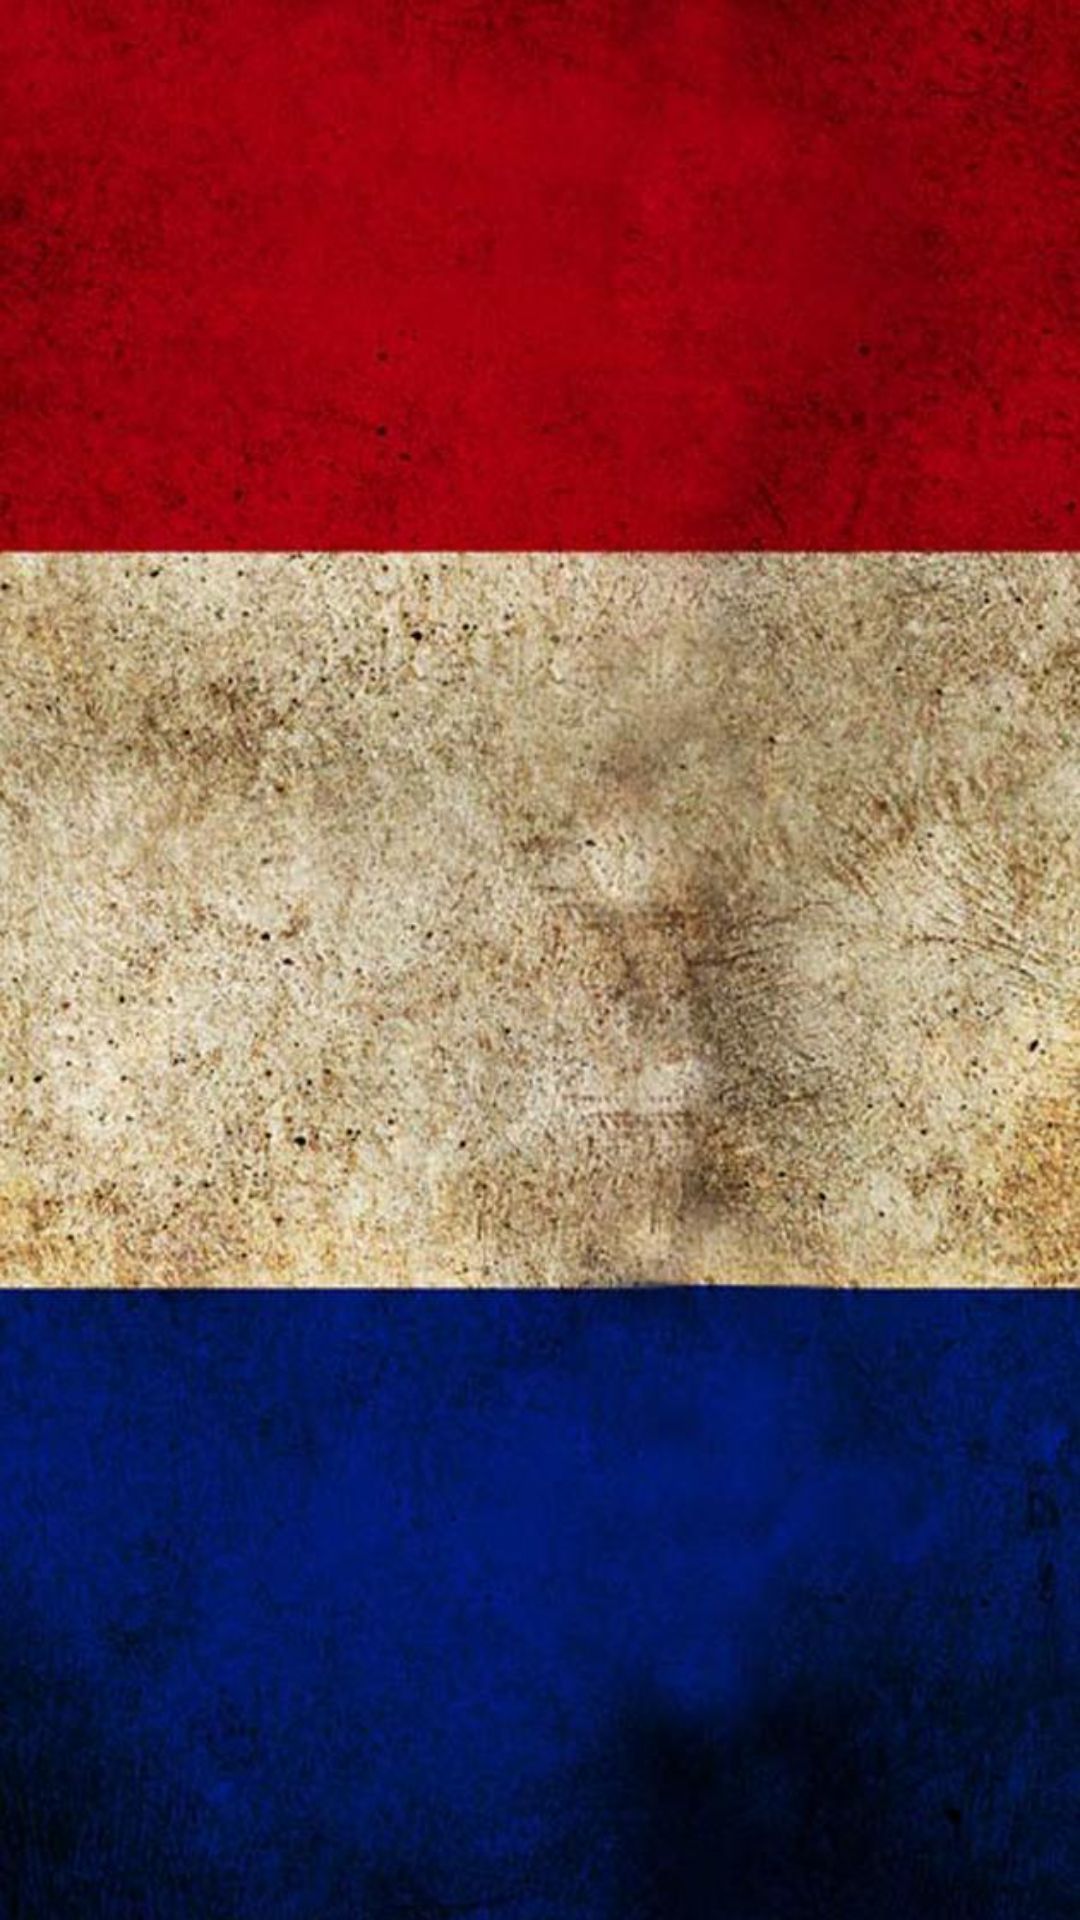 Netherlands Flag Android Wallpaper